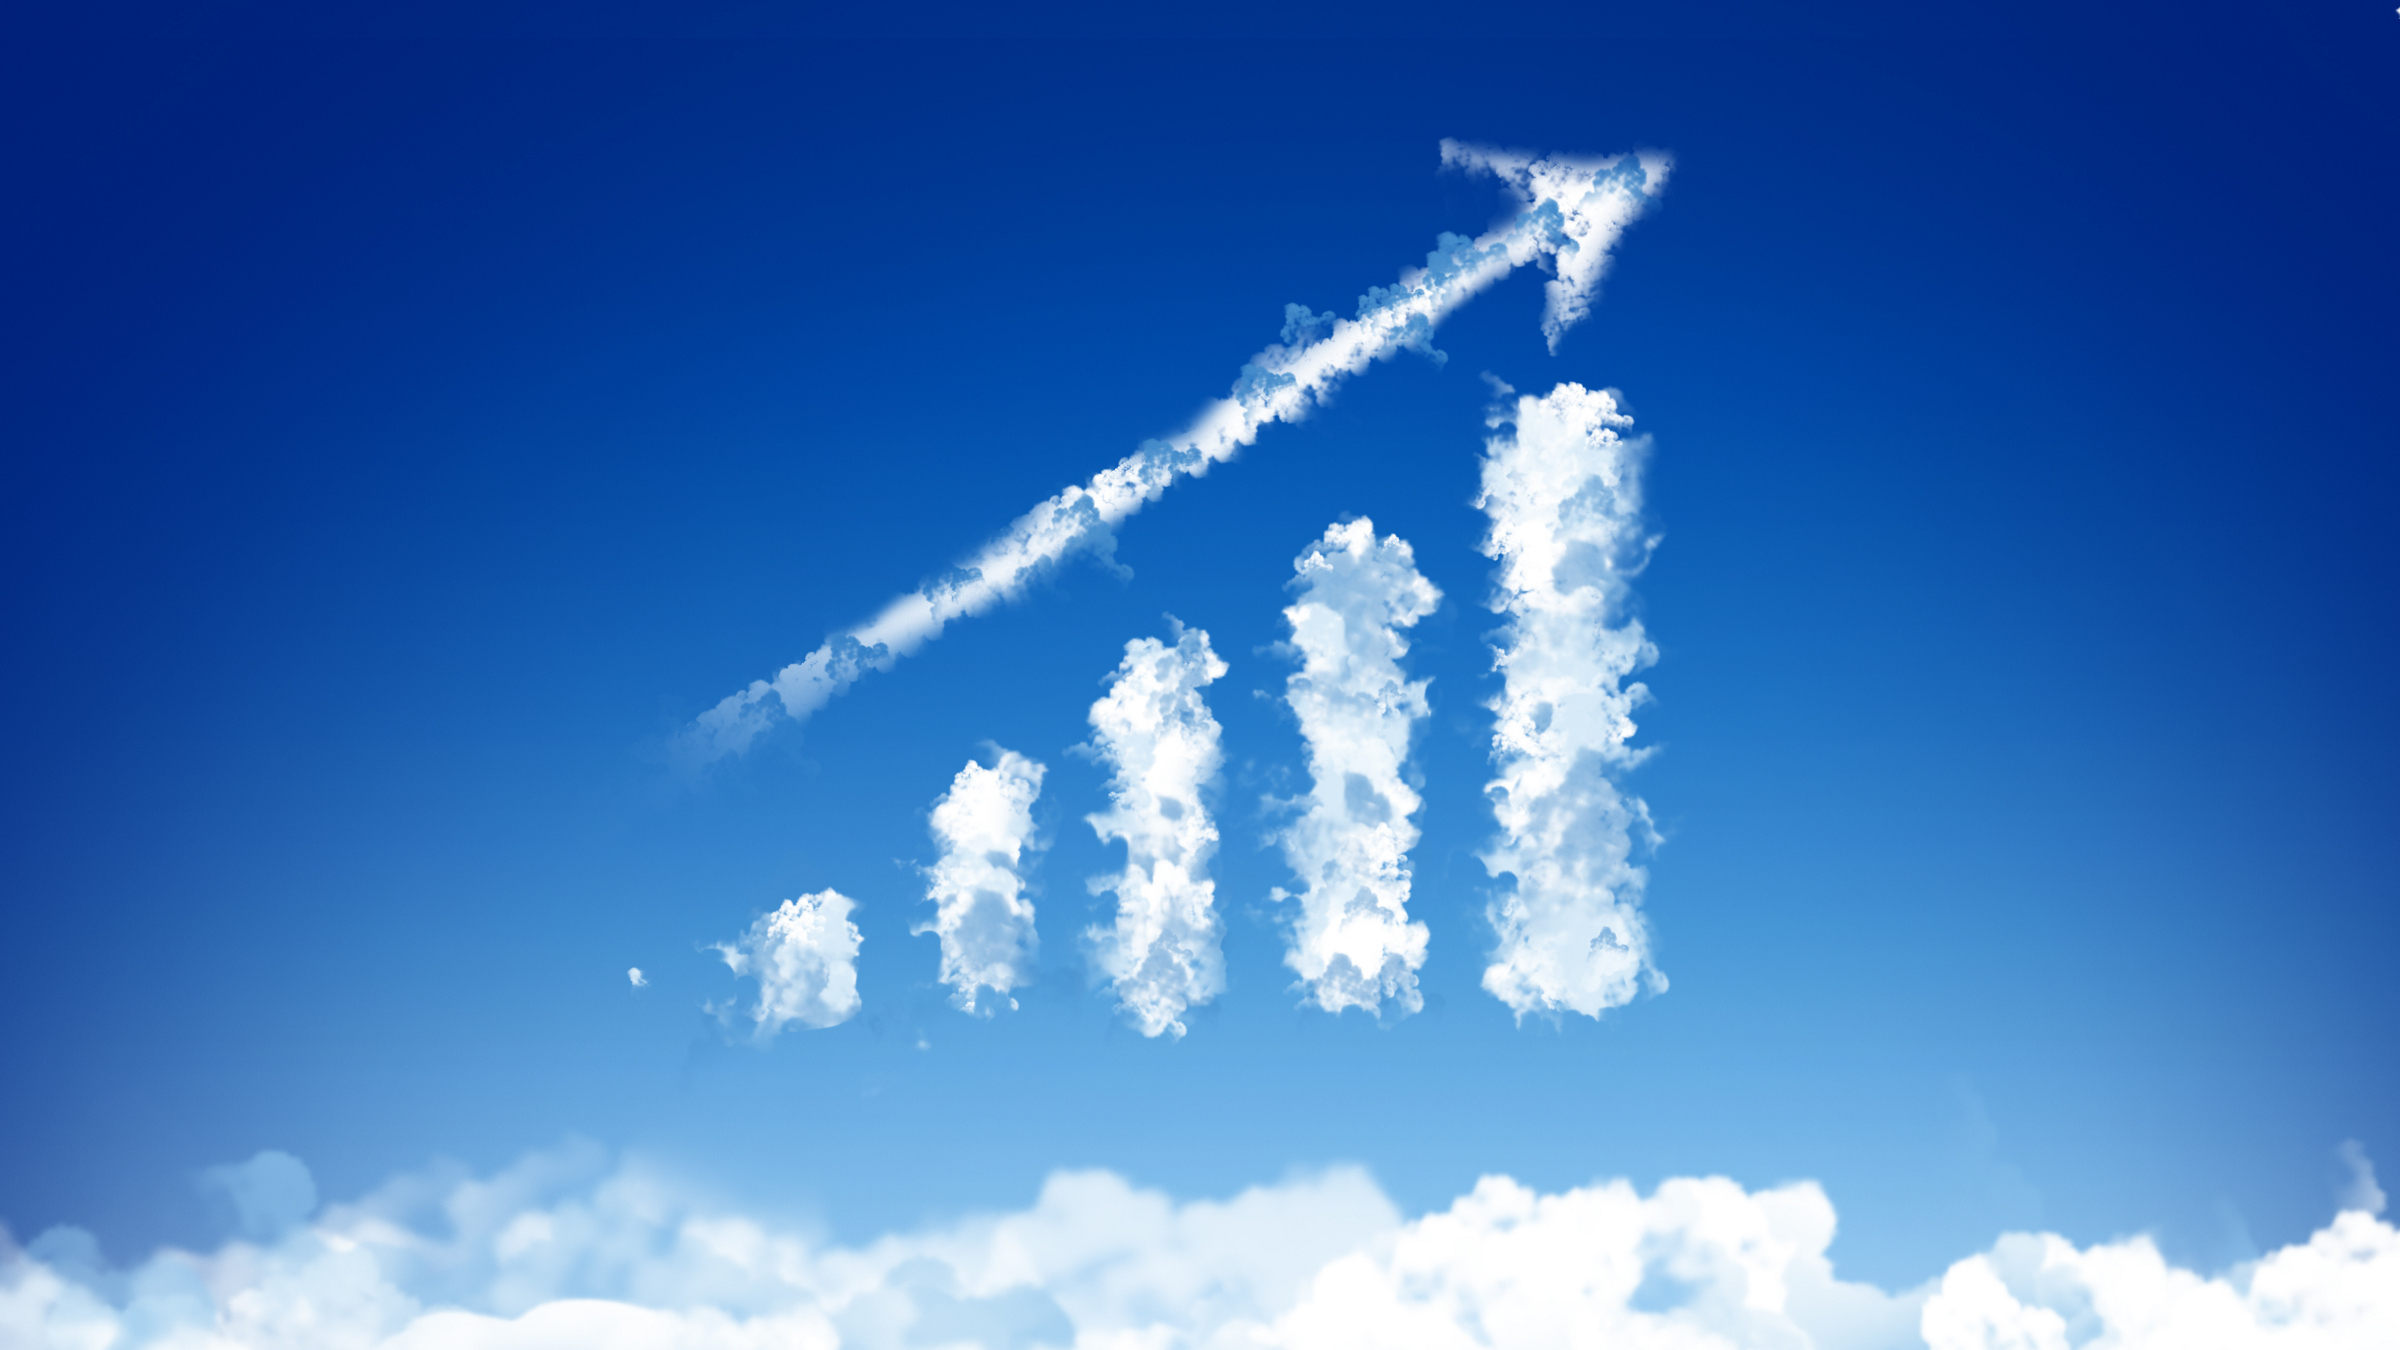 increasing graph made of clouds, illustration